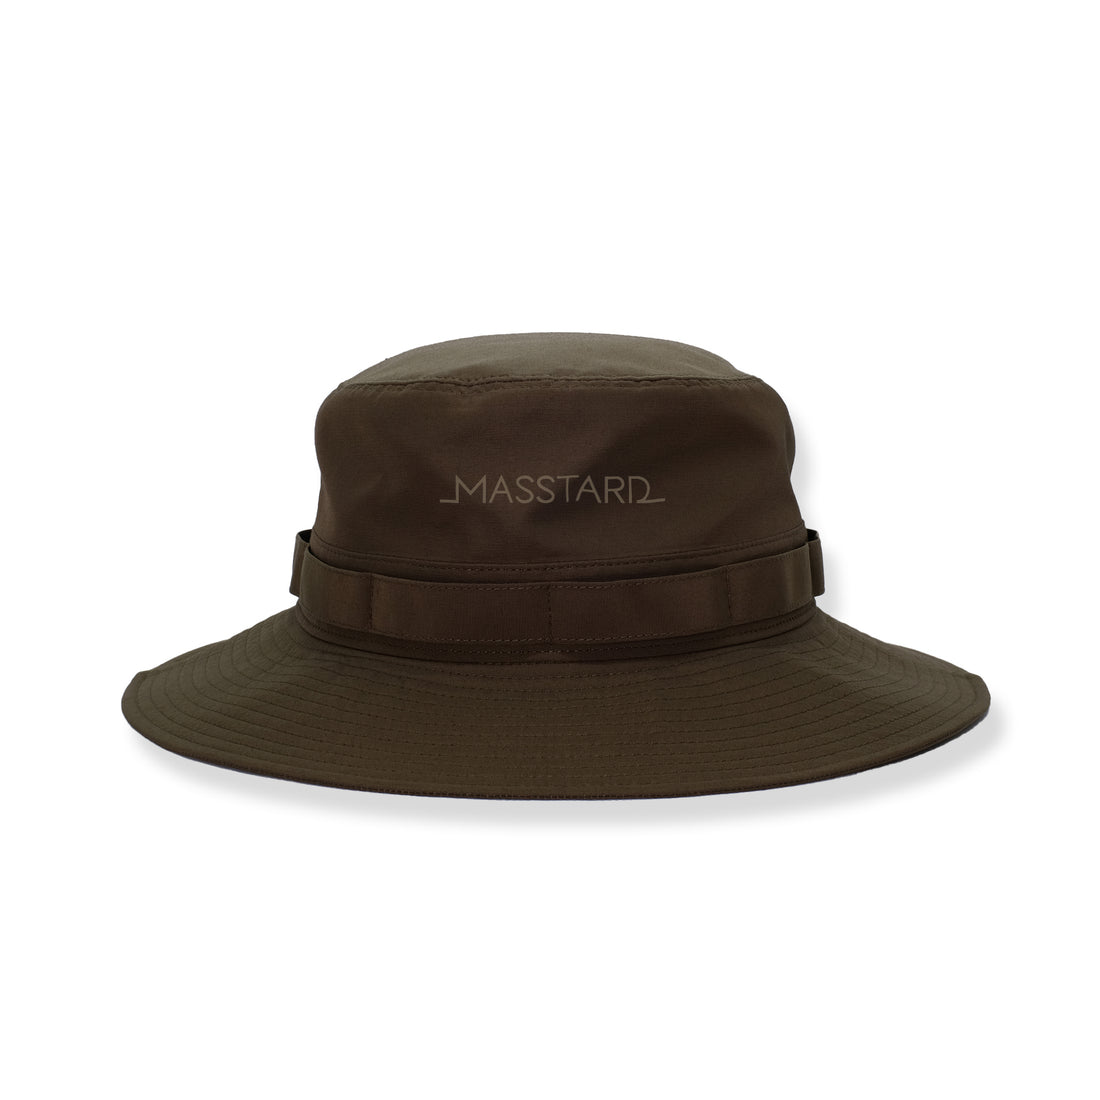 ACTIVE HAT - OLIVE DRAB